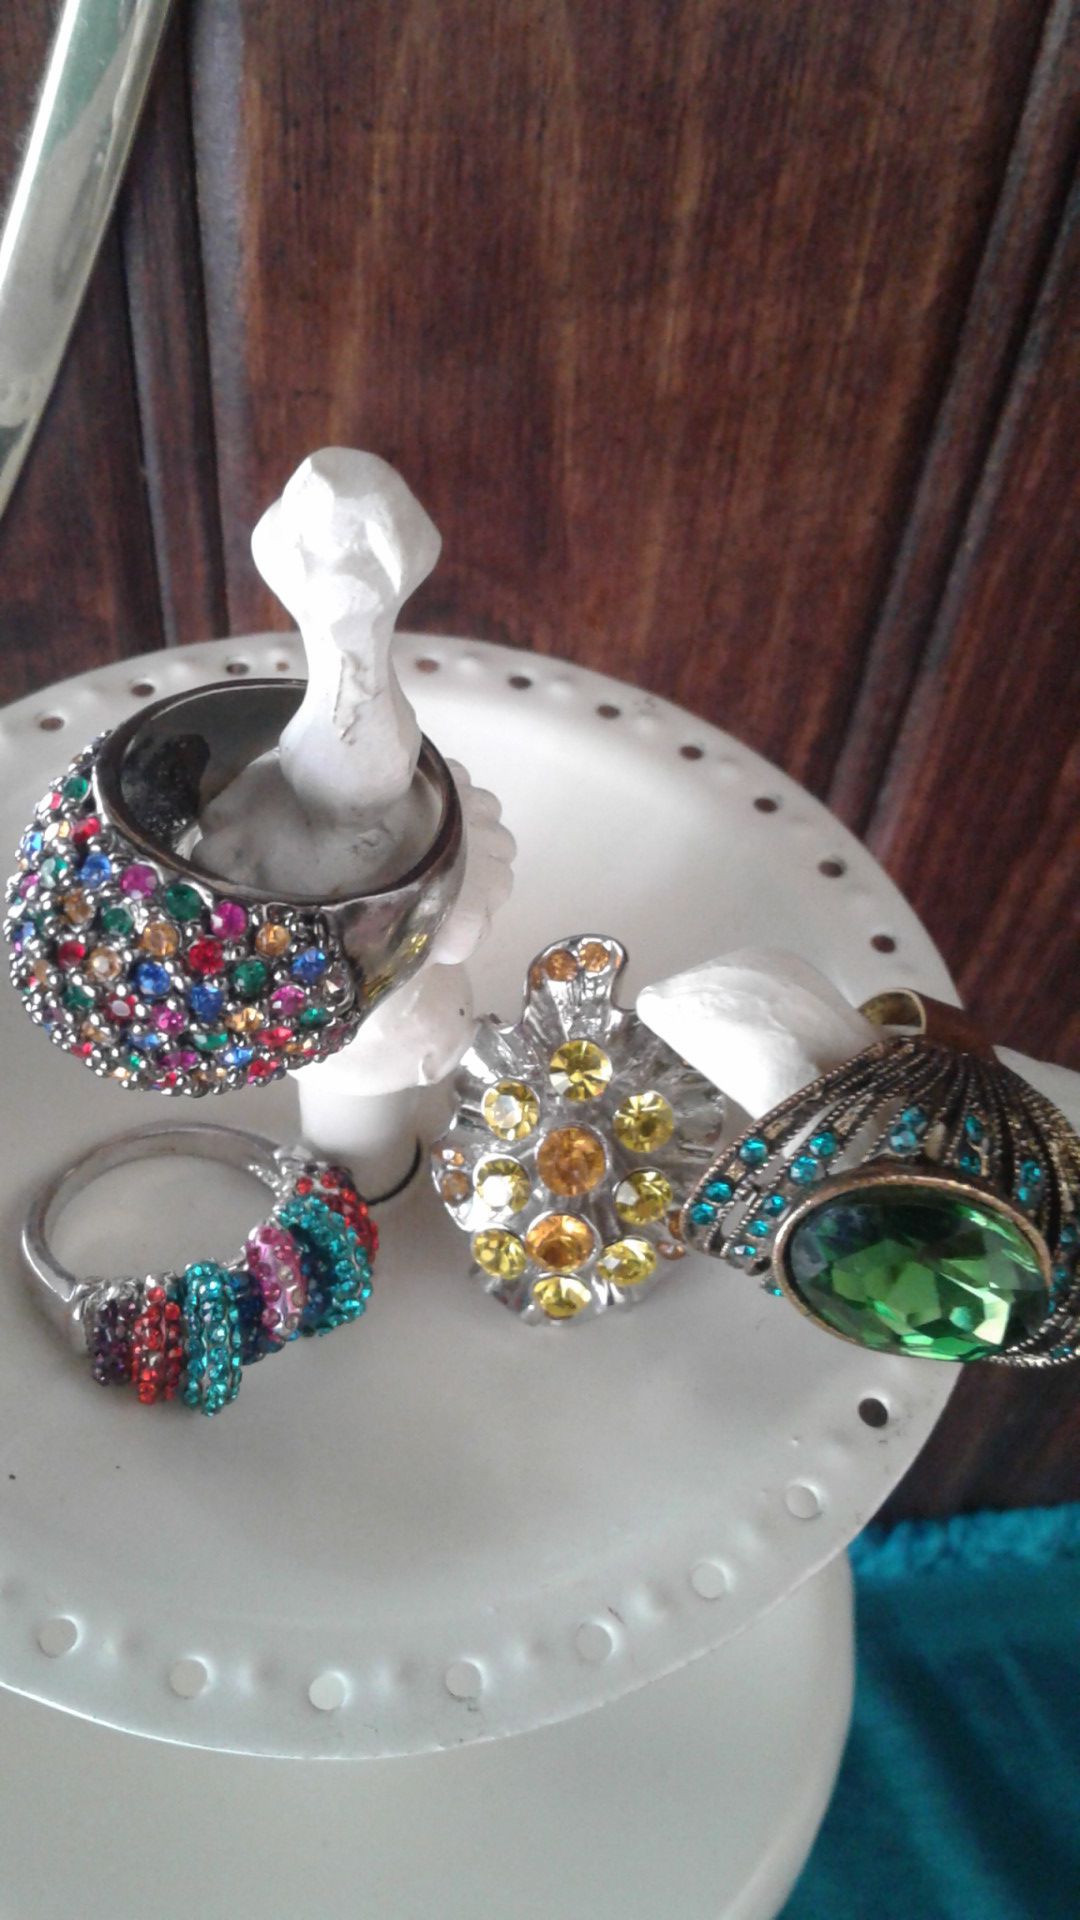 Fine jewelry rings $5 each or $15 for all